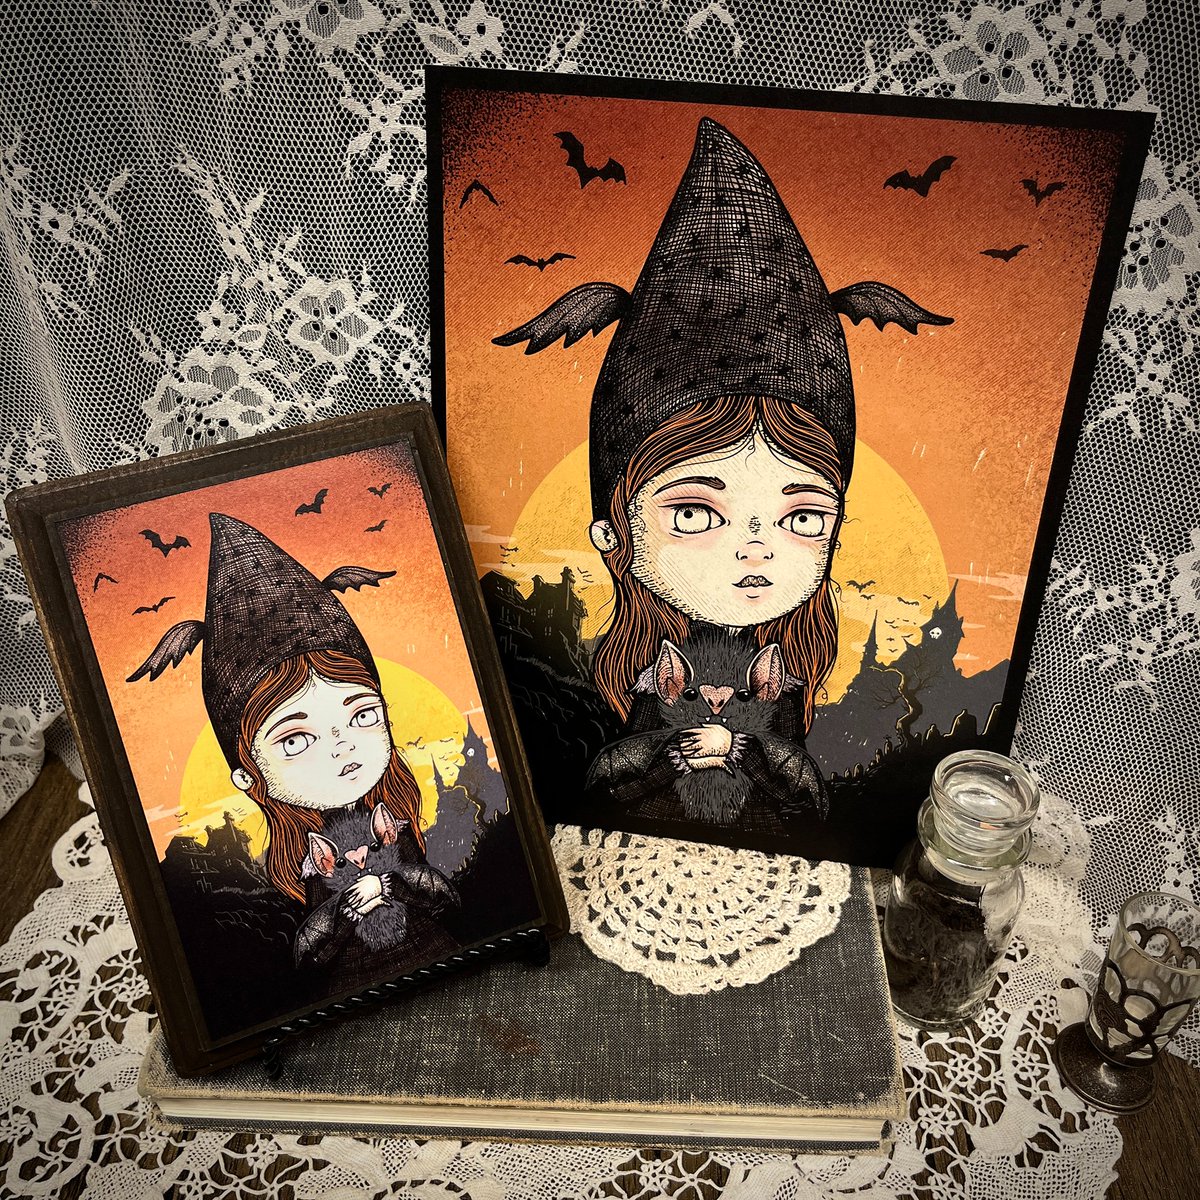 🦇✨ Ready to welcome Emma and her bat friends into your home? This print will be looking to haunt your walls soon, with early access for our 📨 subs! shorturl.at/khZbF #DarkArt #SpookyArt #HalloweenArt #GothicArt #BatArt #IndieArtist #DarkIllustration #SpookySeason